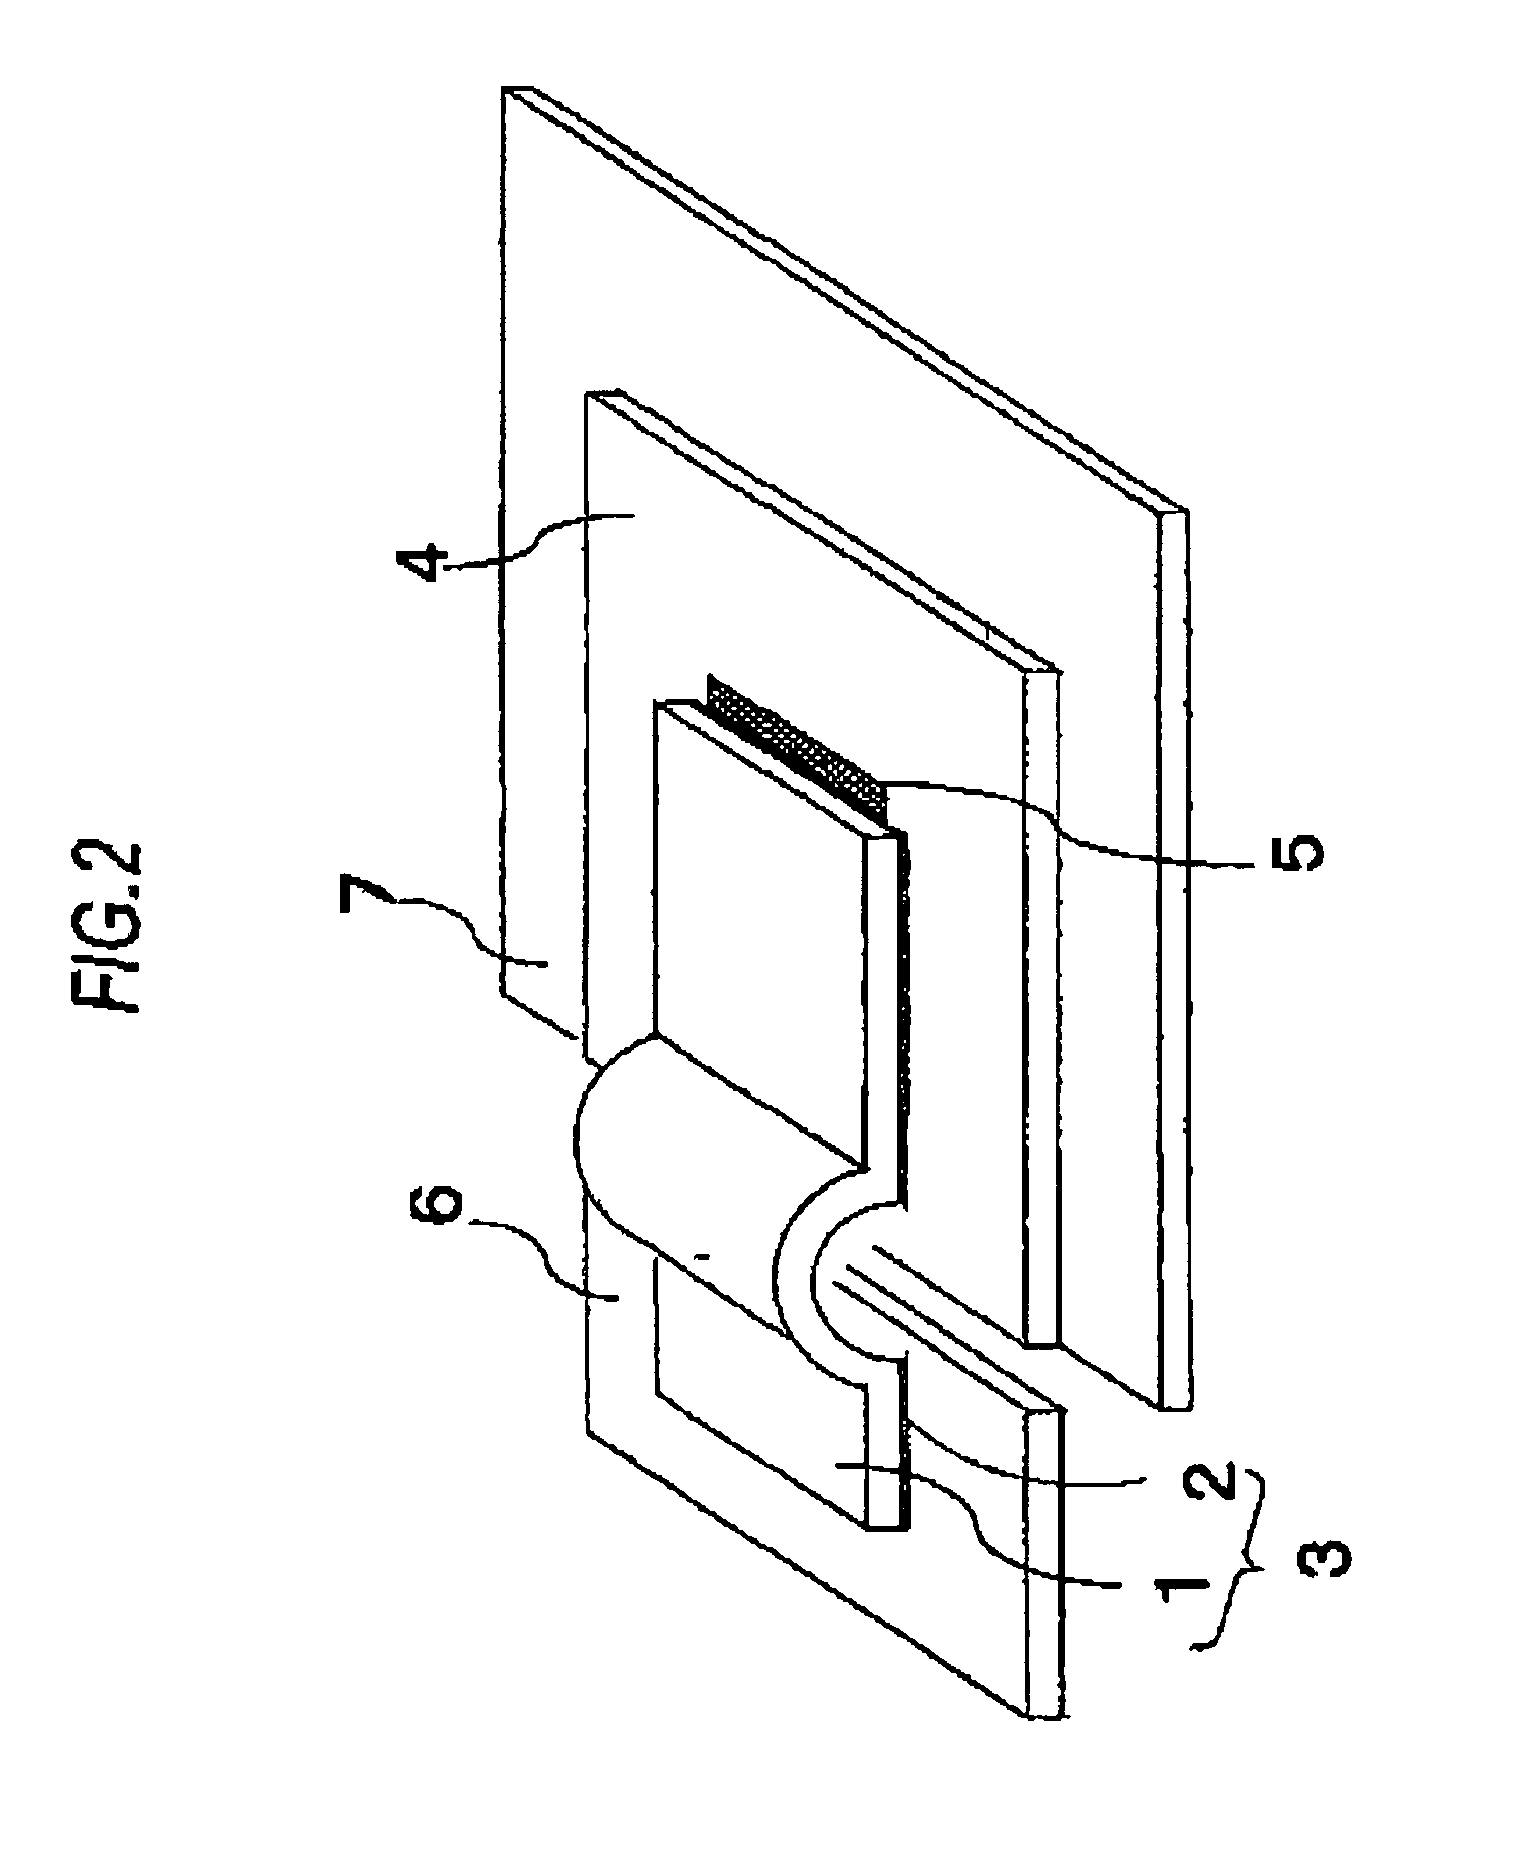 Semiconductor device including a coupling conductor having a concave and convex